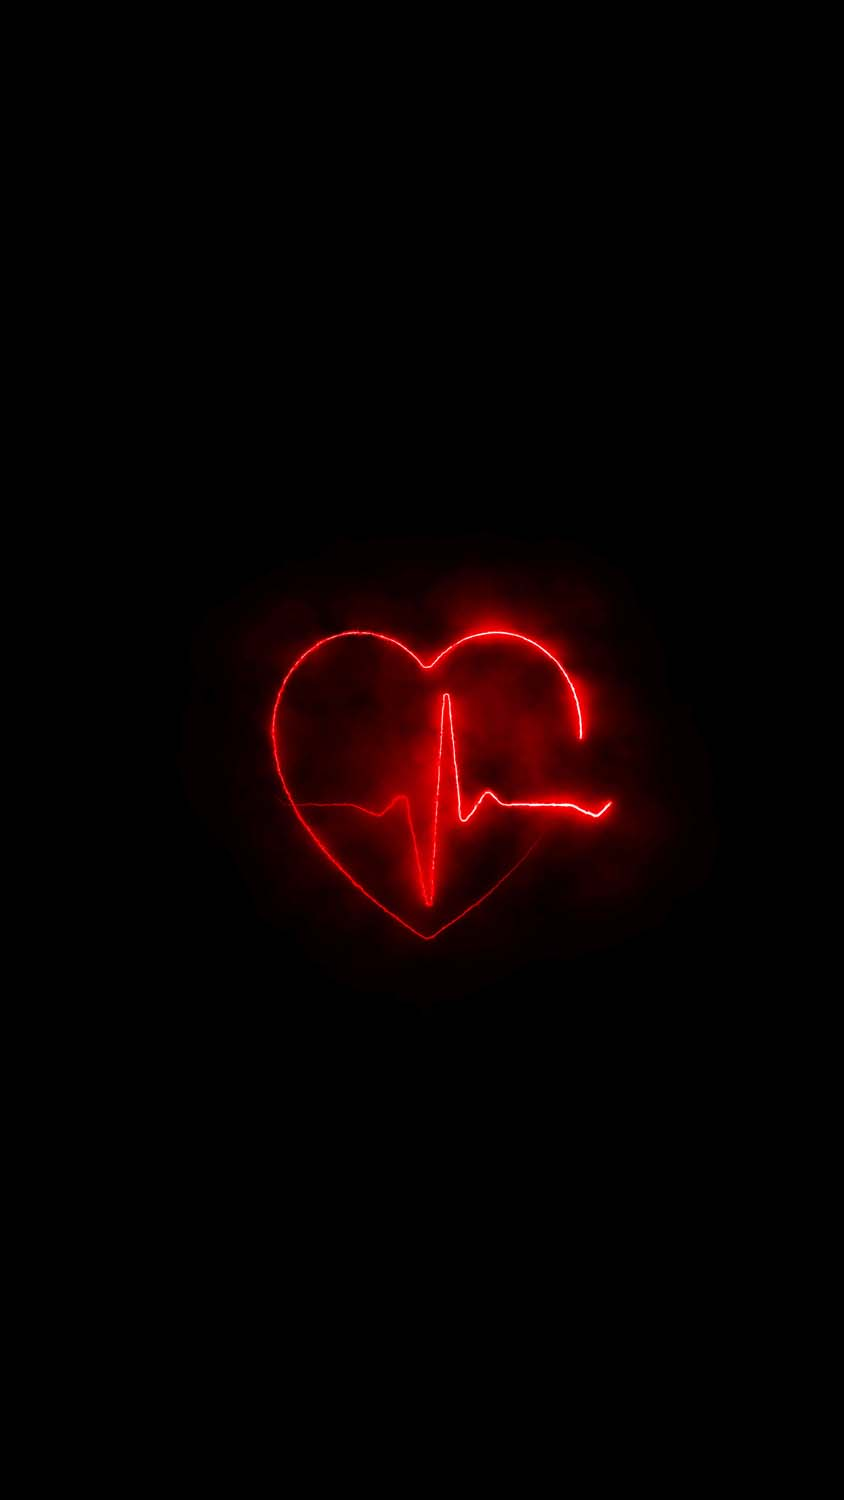 Heart Beating IPhone Wallpaper HD  IPhone Wallpapers